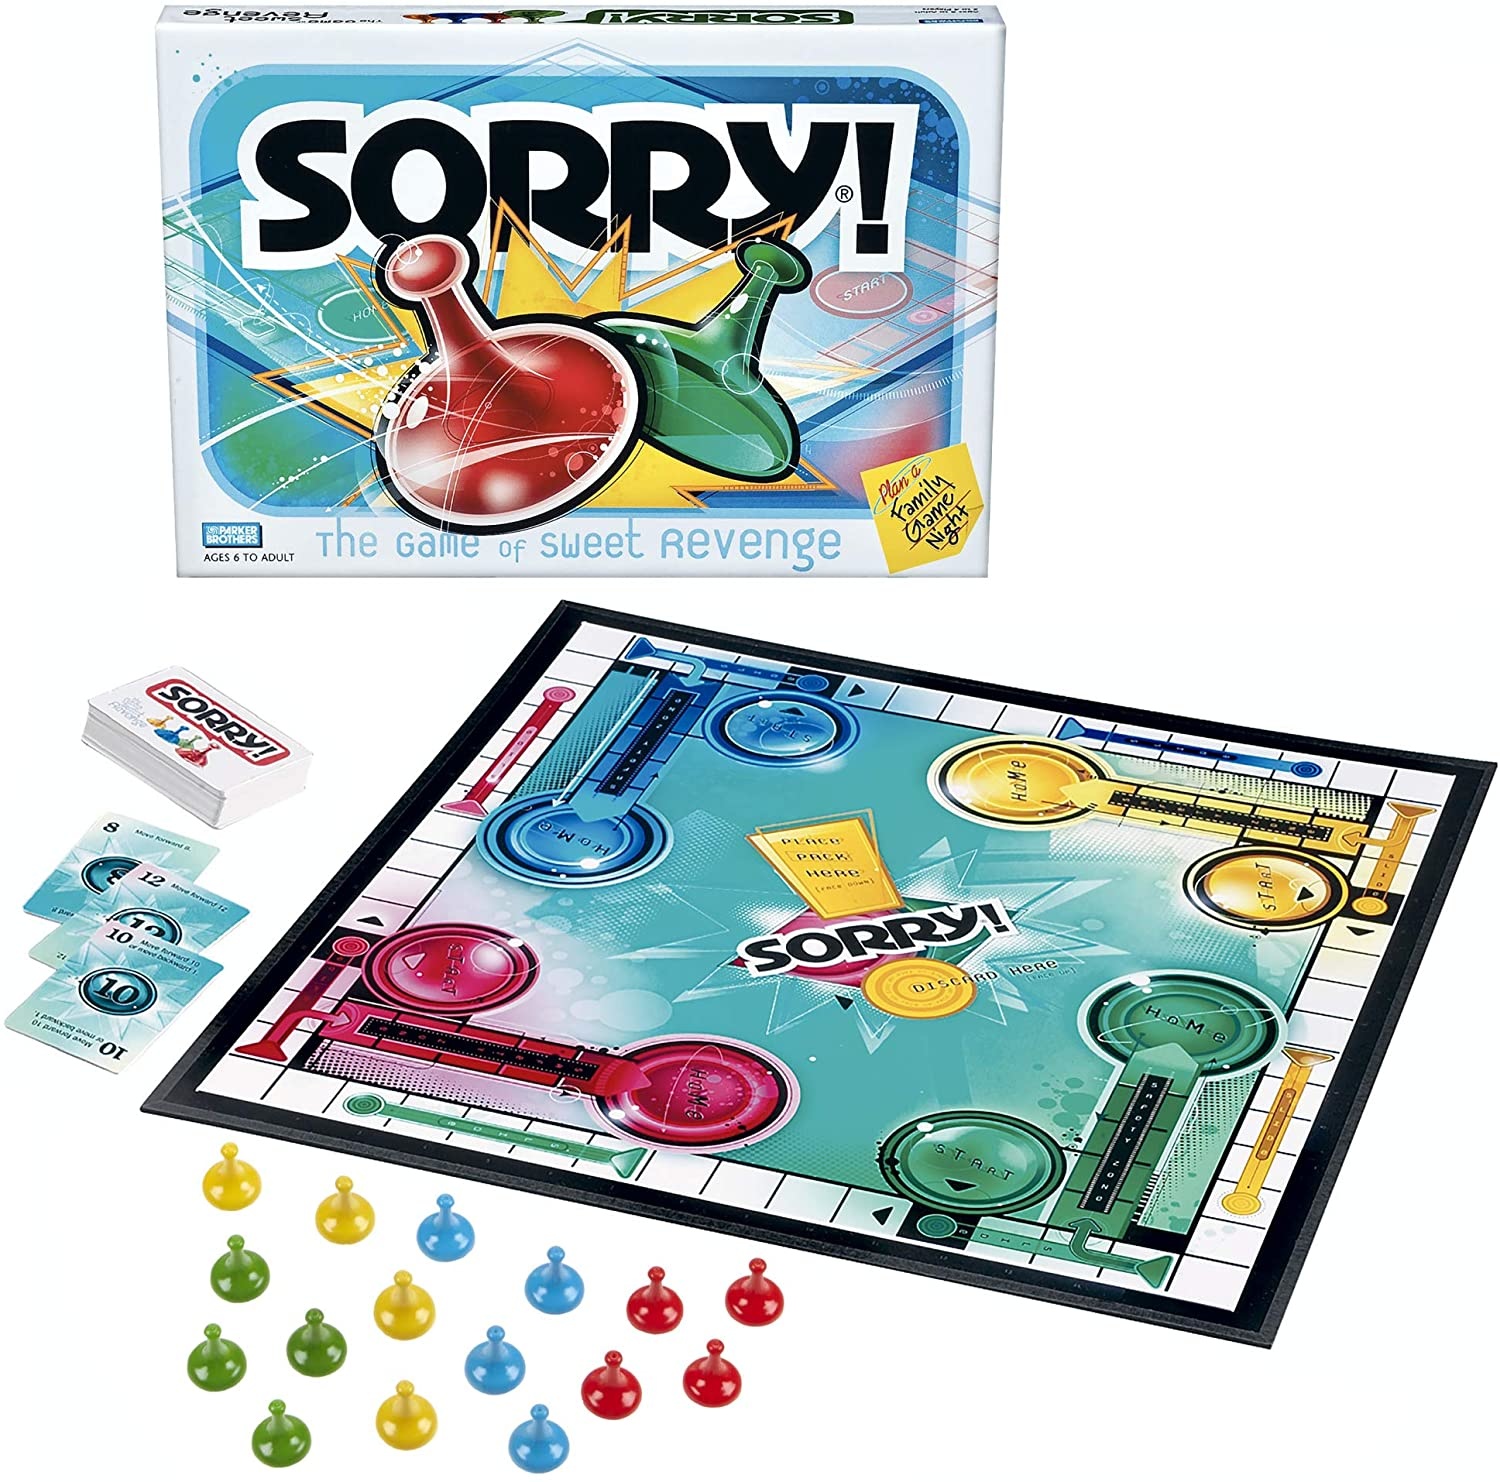 SORRY - THE TOY STORE